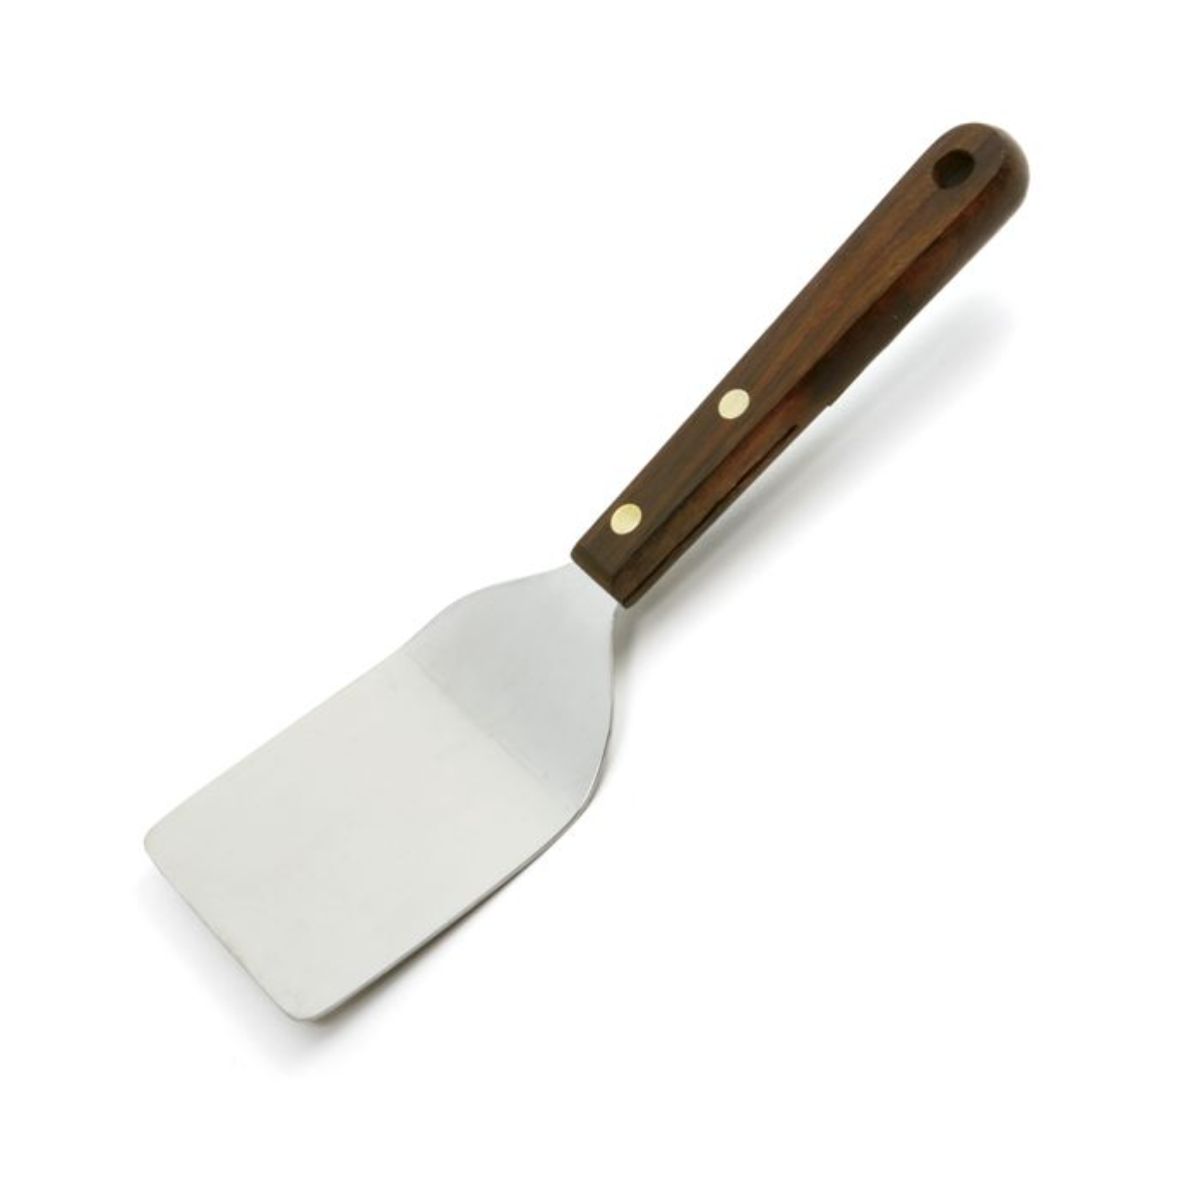 Norpro Stainless Steel Spatula With Wood Handle 7.5"